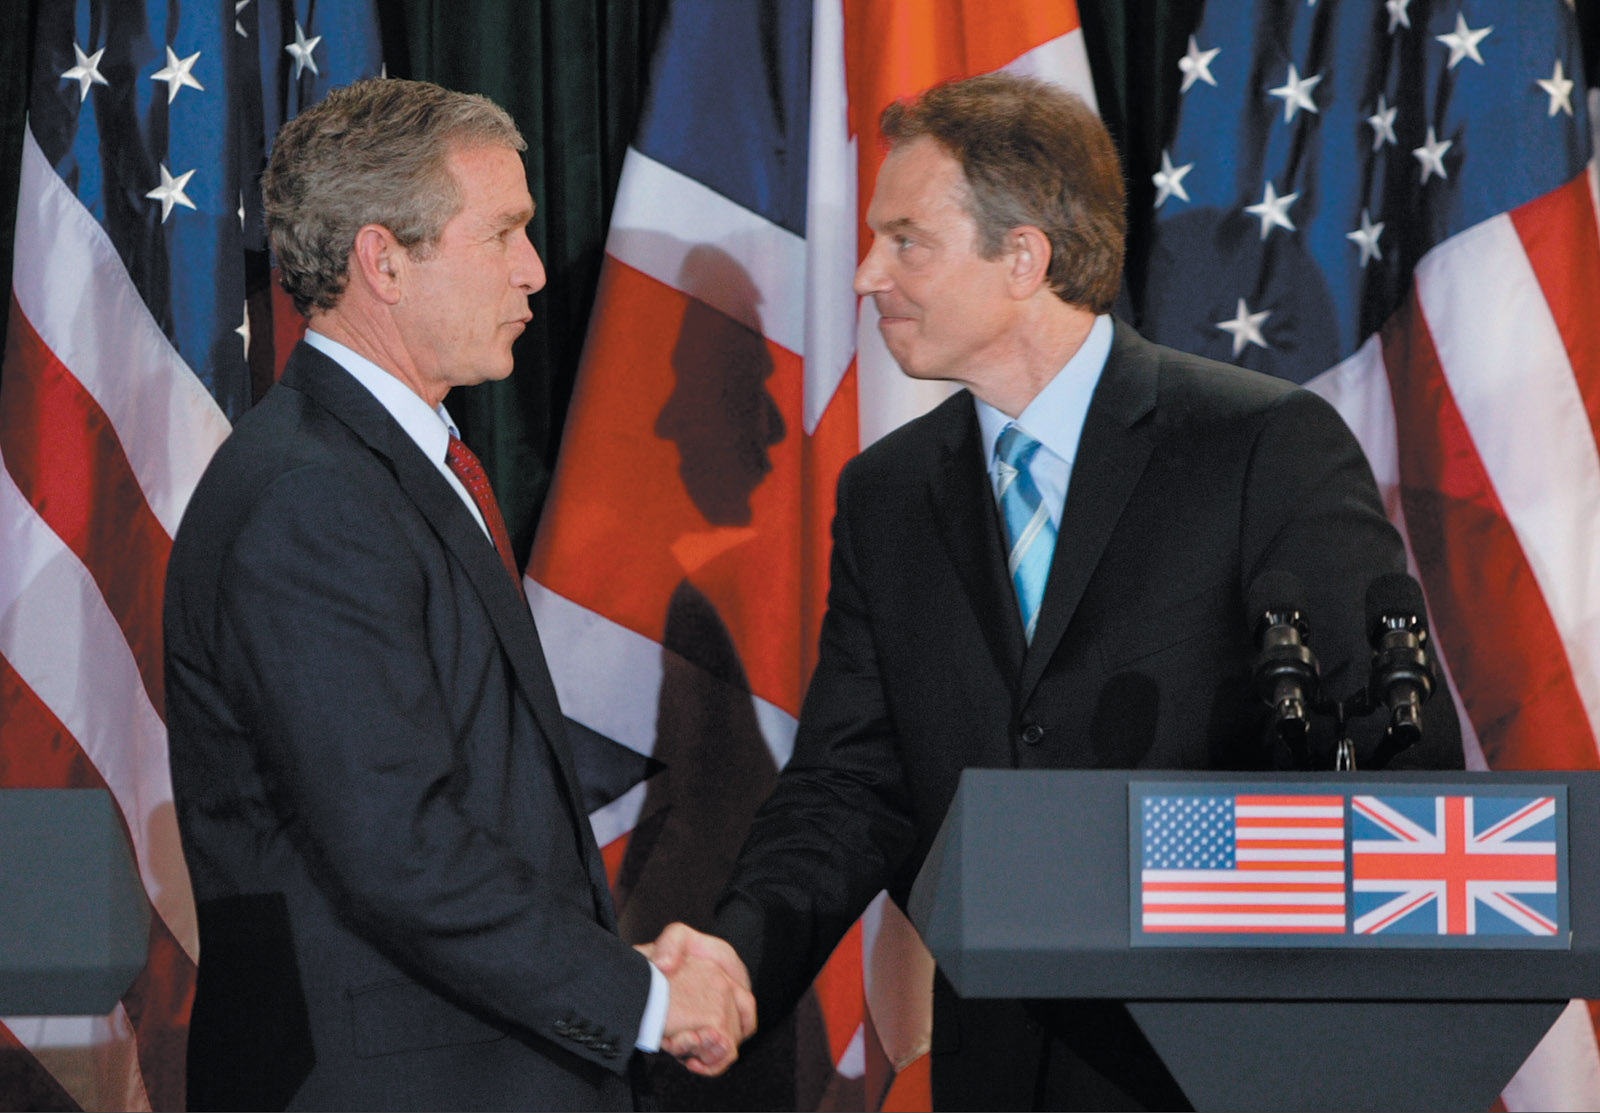 George W. Bush and Tony Blair at a joint press conference at Hillsborough Castle, near Belfast, Northern Ireland, April 2003